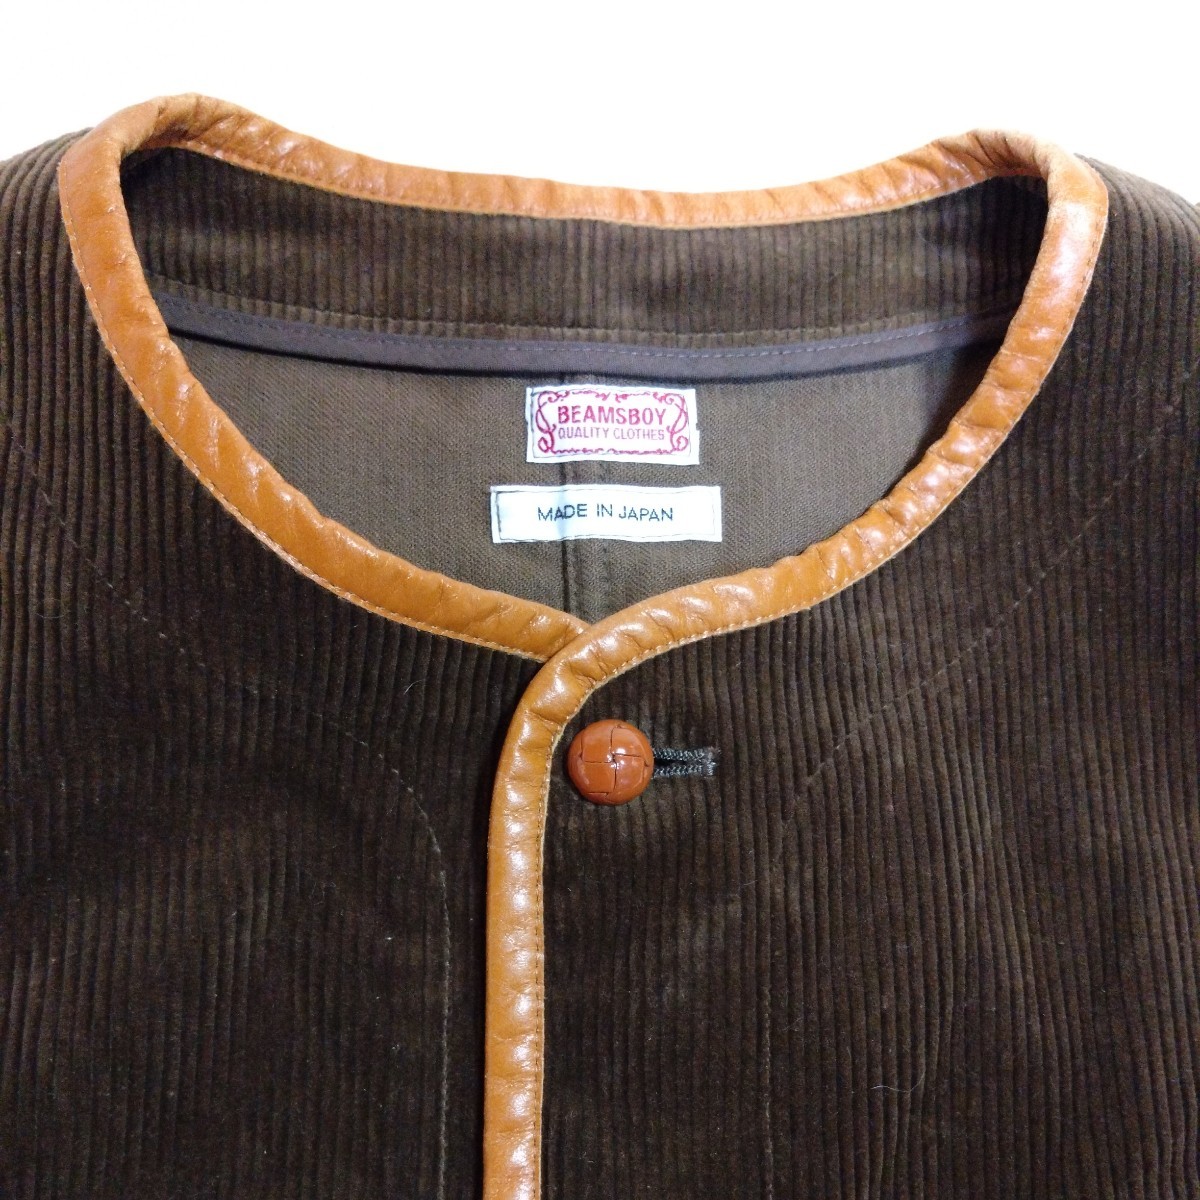 BEAMS BOY lady's corduroy the best one size made in Japan 